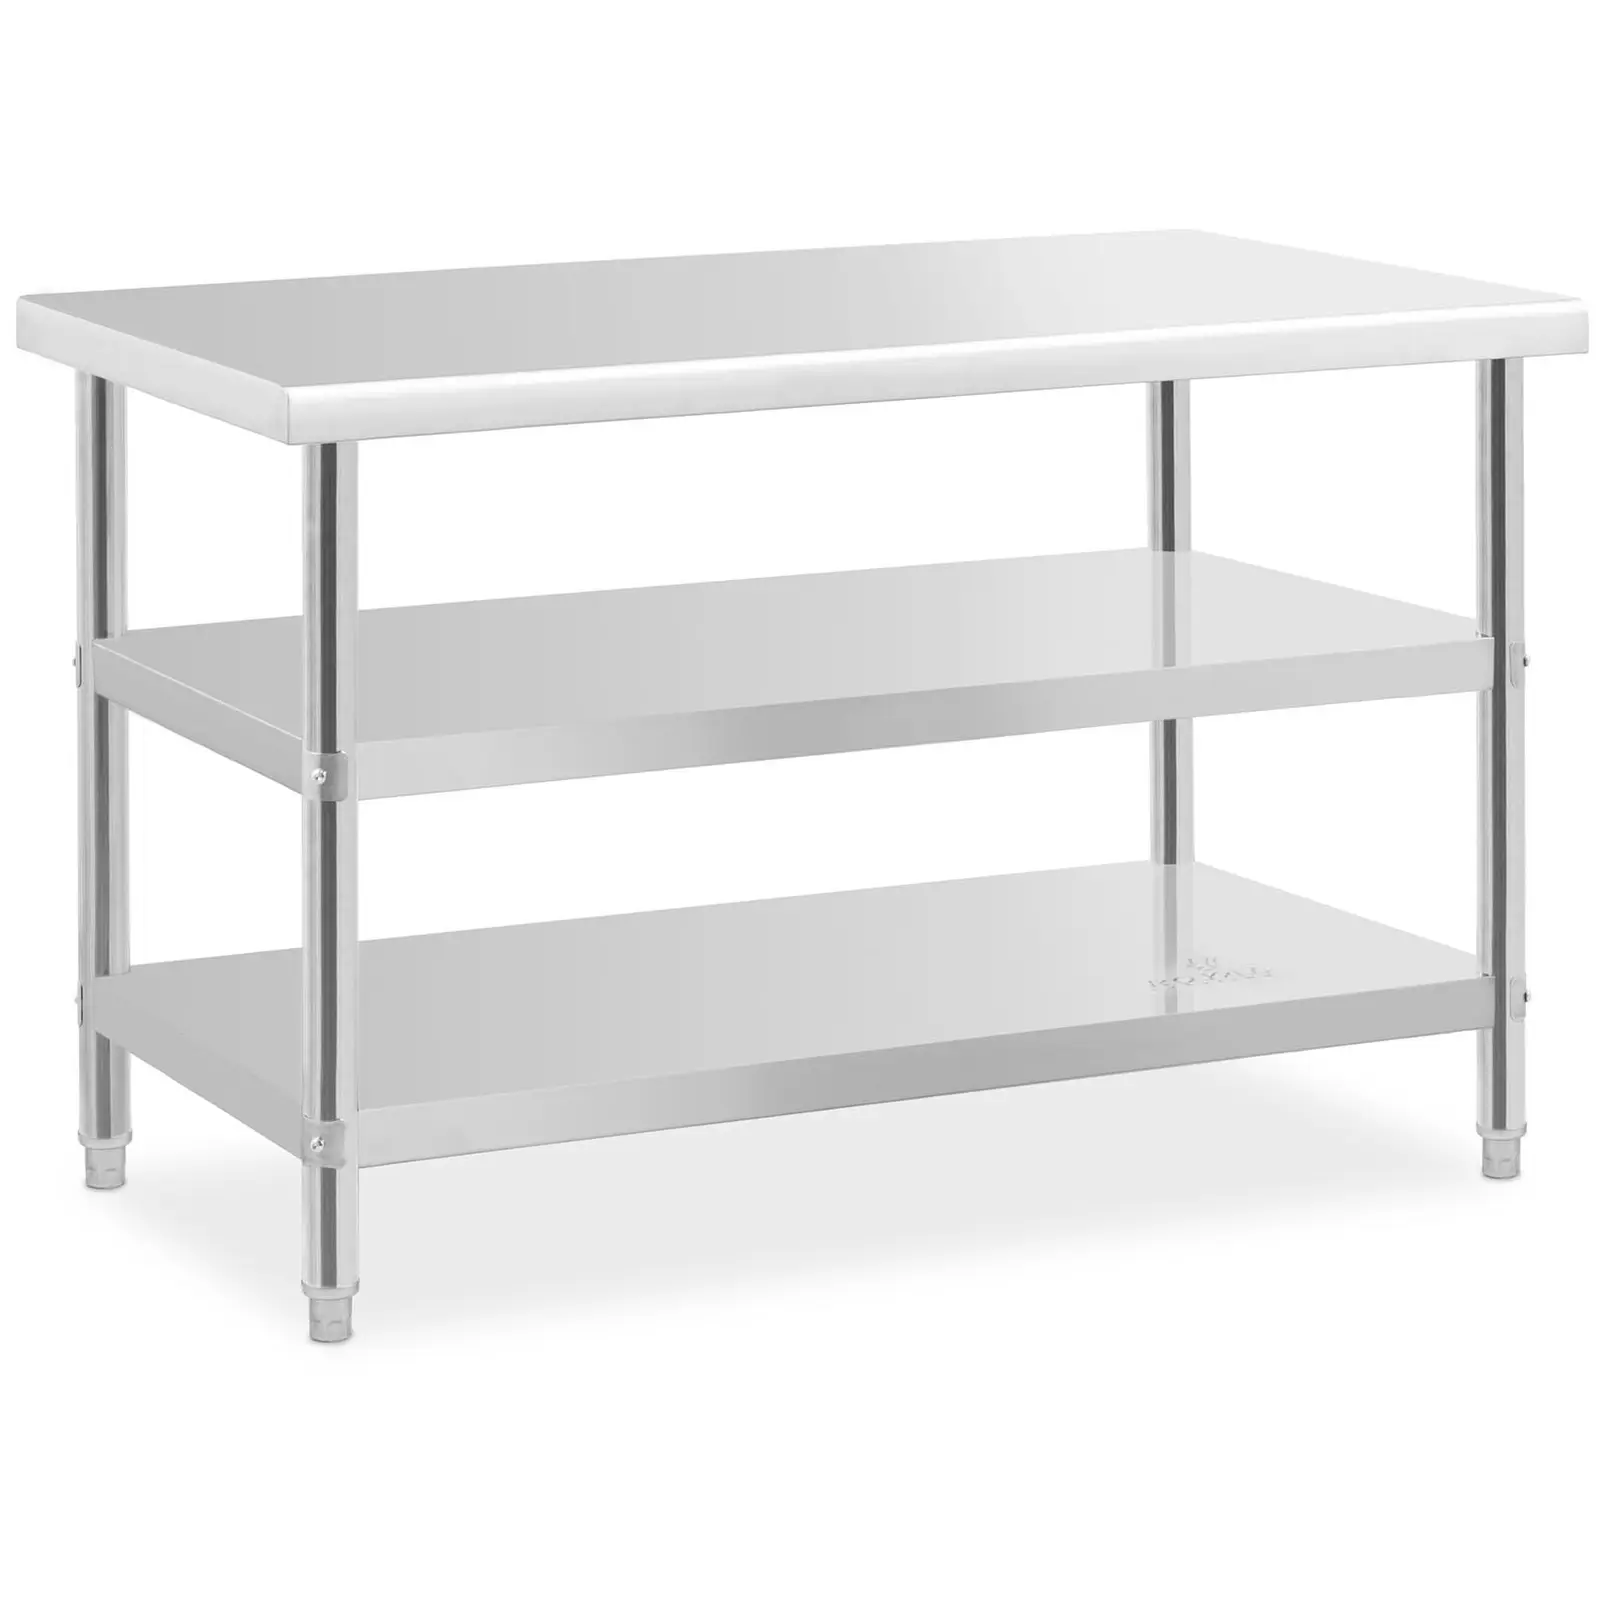 Stainless steel table - 120 x 70 x 5 cm - 200 kg - 2 shelves - Royal Catering